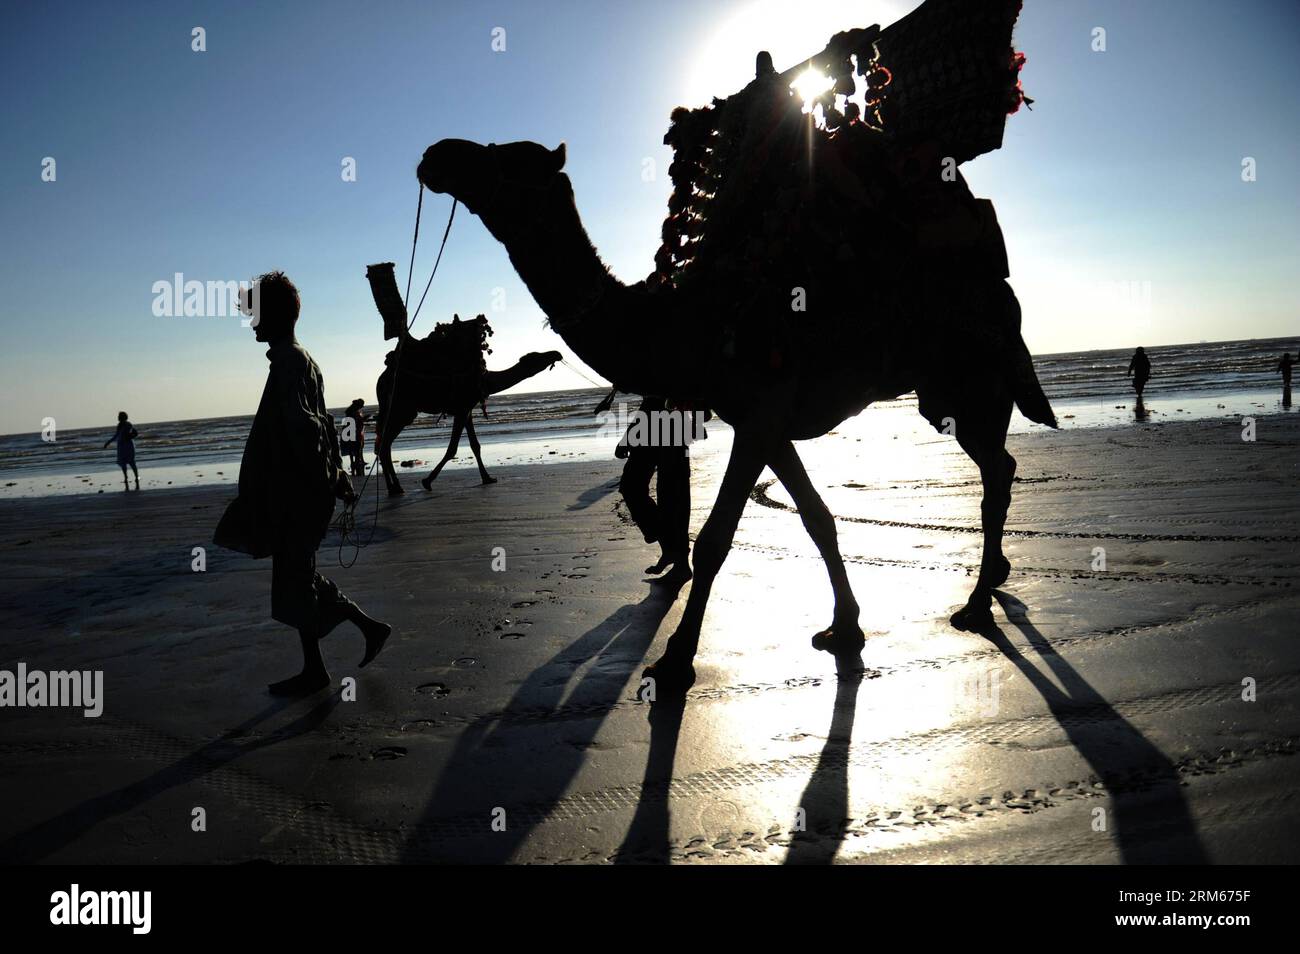 Bildnummer: 60831512  Datum: 14.12.2013  Copyright: imago/Xinhua     Owners of camels wait for customers on a beach during sunset in Karachi, Pakistan, on Dec. 14, 2013. (Xinhua/Huang Zongzhi) PAKISTAN-KARACHI-SUNSET PUBLICATIONxNOTxINxCHN xcb x0x 2013 quer Stock Photo